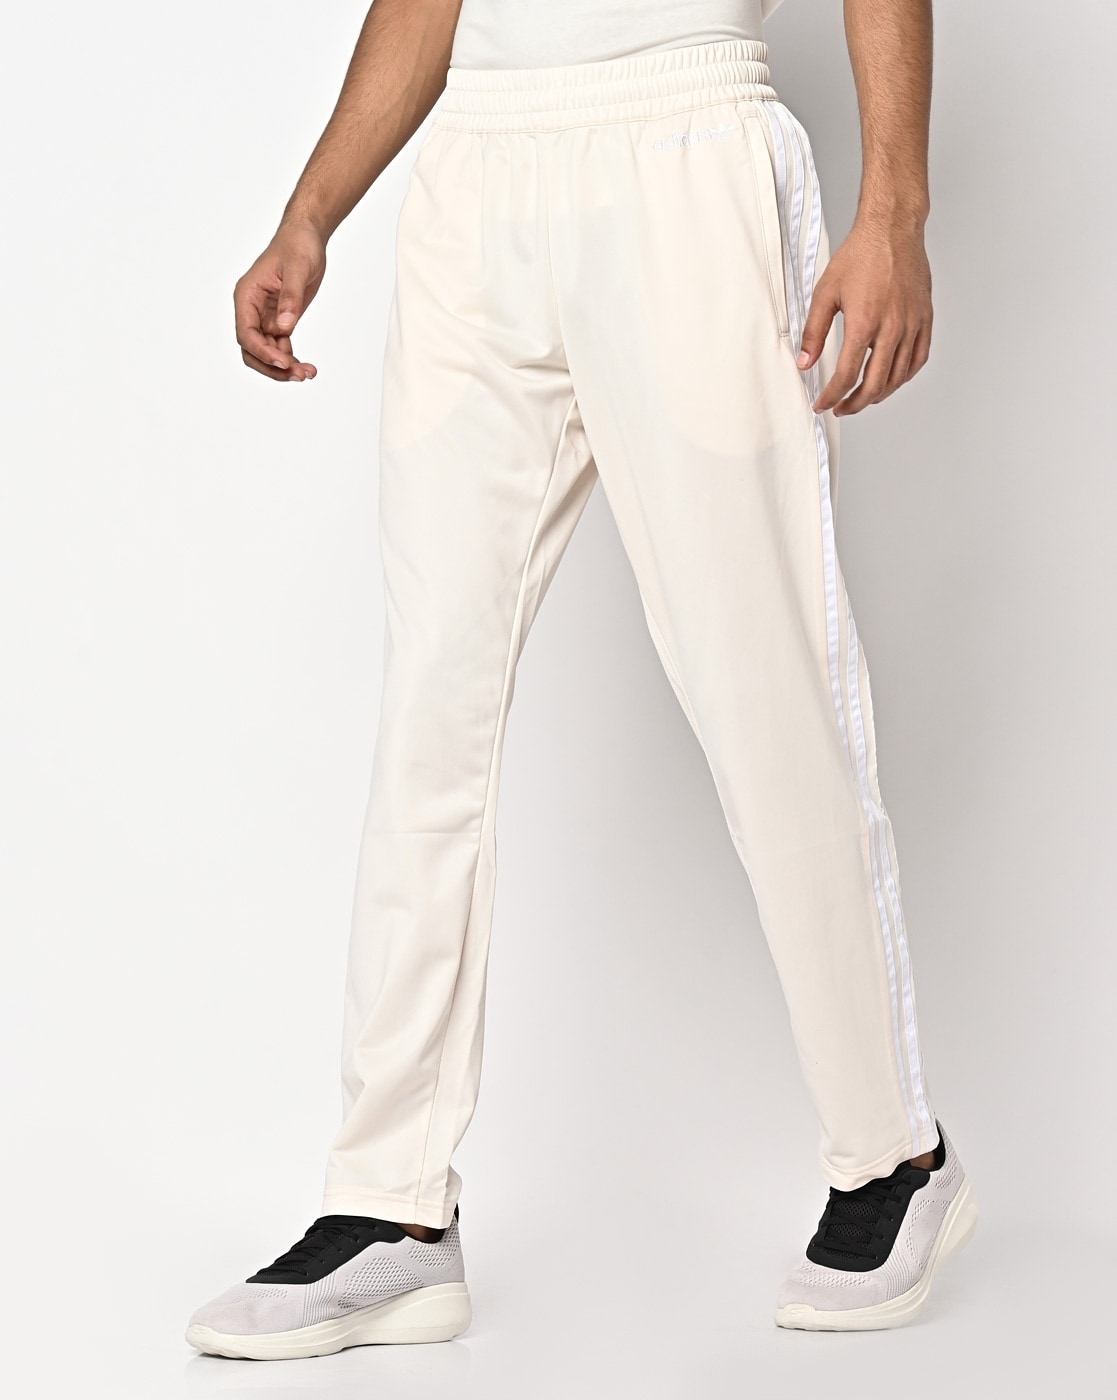 Buy online Offwhite Polyester Flat Front Formal Trouser from Bottom Wear  for Men by Solemio for 819 at 59 off  2023 Limeroadcom